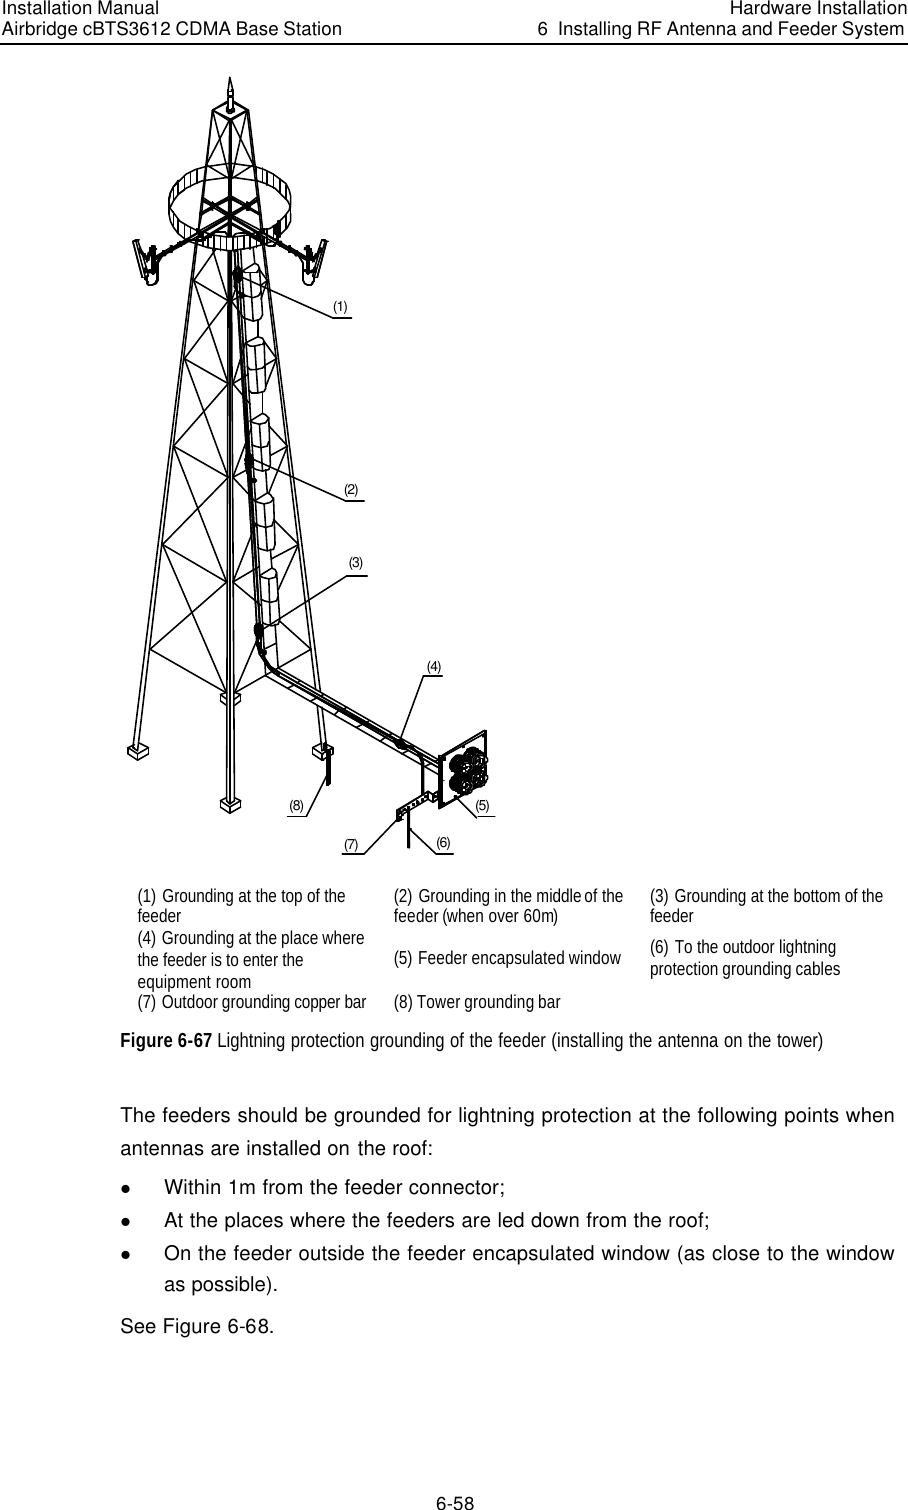 Installation Manual Airbridge cBTS3612 CDMA Base Station Hardware Installation6  Installing RF Antenna and Feeder System 6-58 (1)(2)(3)(4)(5)(6)(7)(8) (1) Grounding at the top of the feeder (2) Grounding in the middle of the feeder (when over 60m) (3) Grounding at the bottom of the feeder (4) Grounding at the place where the feeder is to enter the equipment room (5) Feeder encapsulated window  (6) To the outdoor lightning protection grounding cables (7) Outdoor grounding copper bar  (8) Tower grounding bar   Figure 6-67 Lightning protection grounding of the feeder (installing the antenna on the tower) The feeders should be grounded for lightning protection at the following points when antennas are installed on the roof: l Within 1m from the feeder connector; l At the places where the feeders are led down from the roof; l On the feeder outside the feeder encapsulated window (as close to the window as possible). See Figure 6-68. 